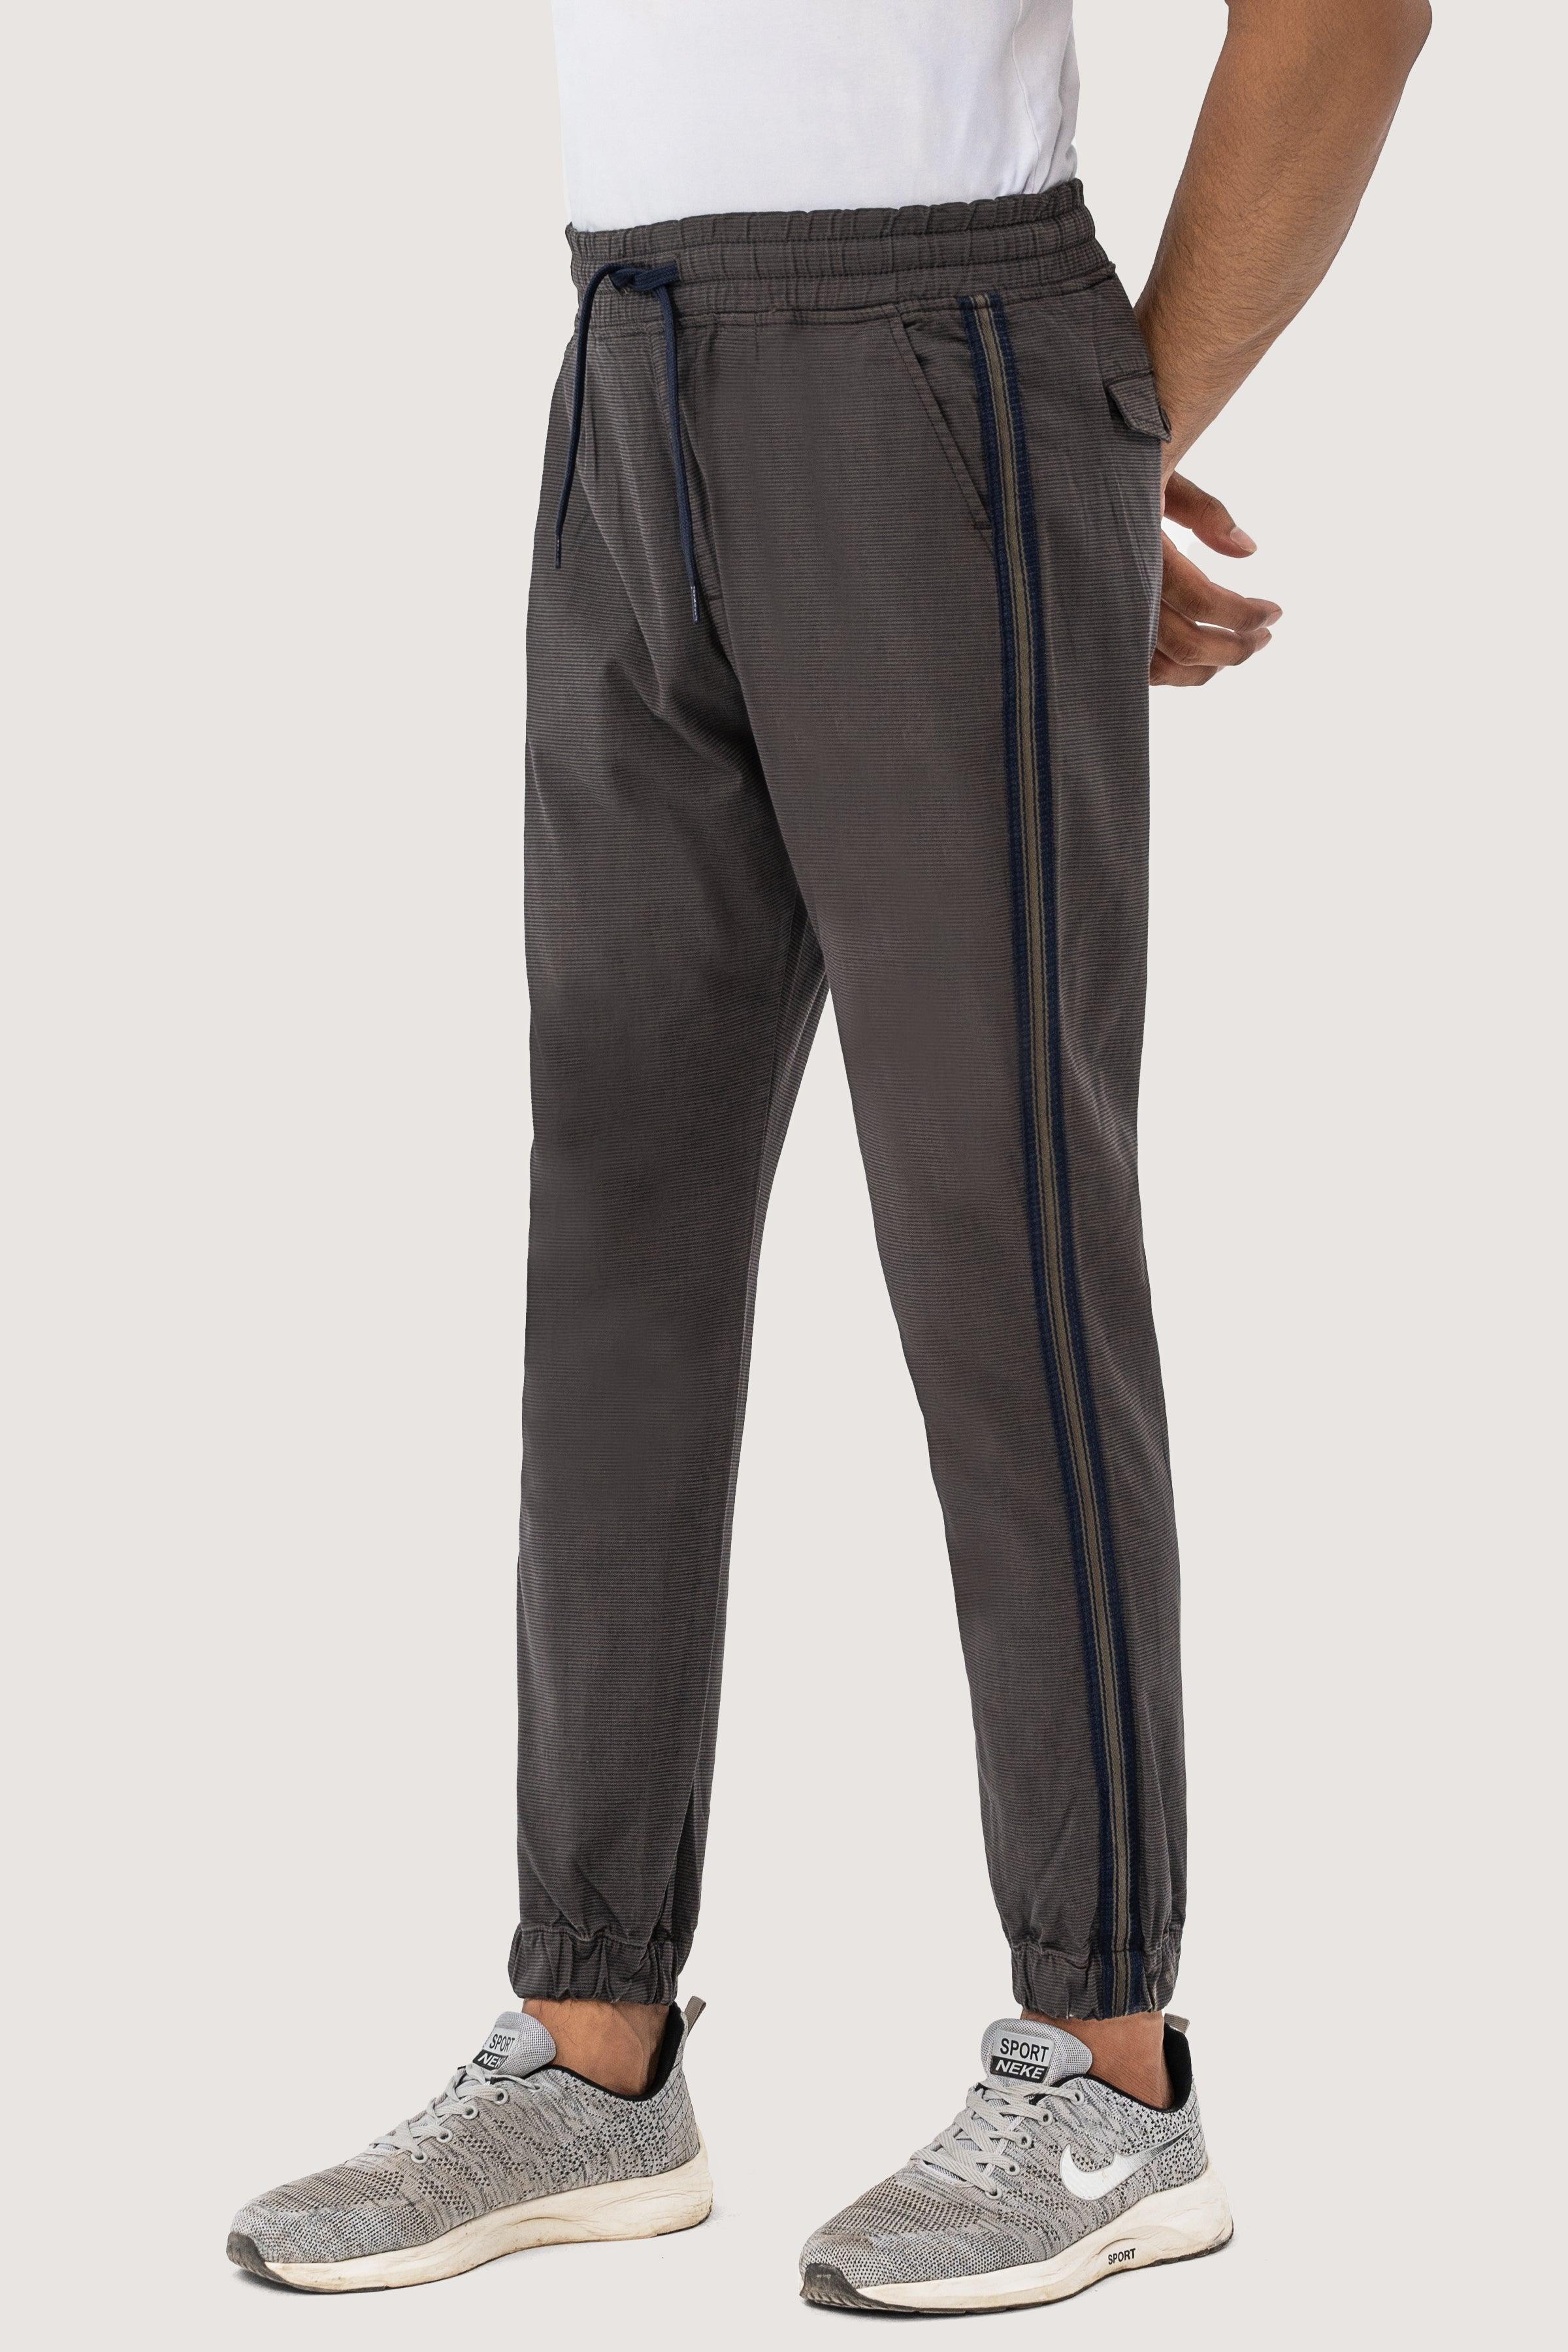 SELF TEXTURED CONTRAST TAPE TROUSER OLIVE at Charcoal Clothing